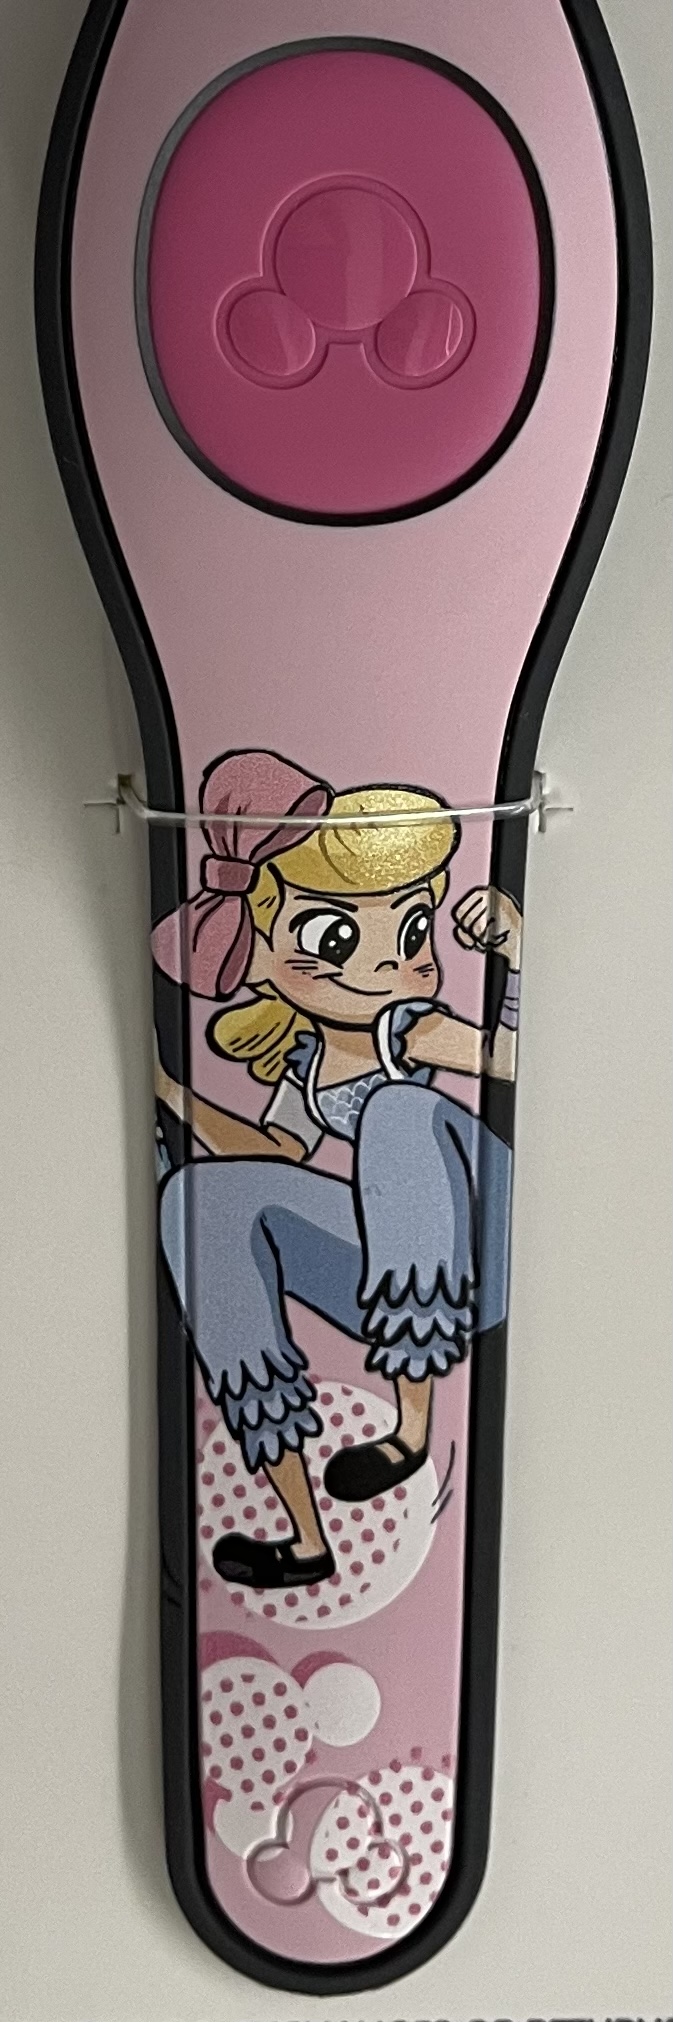 Check out this new Bo Peep Open Edition MagicBand just released